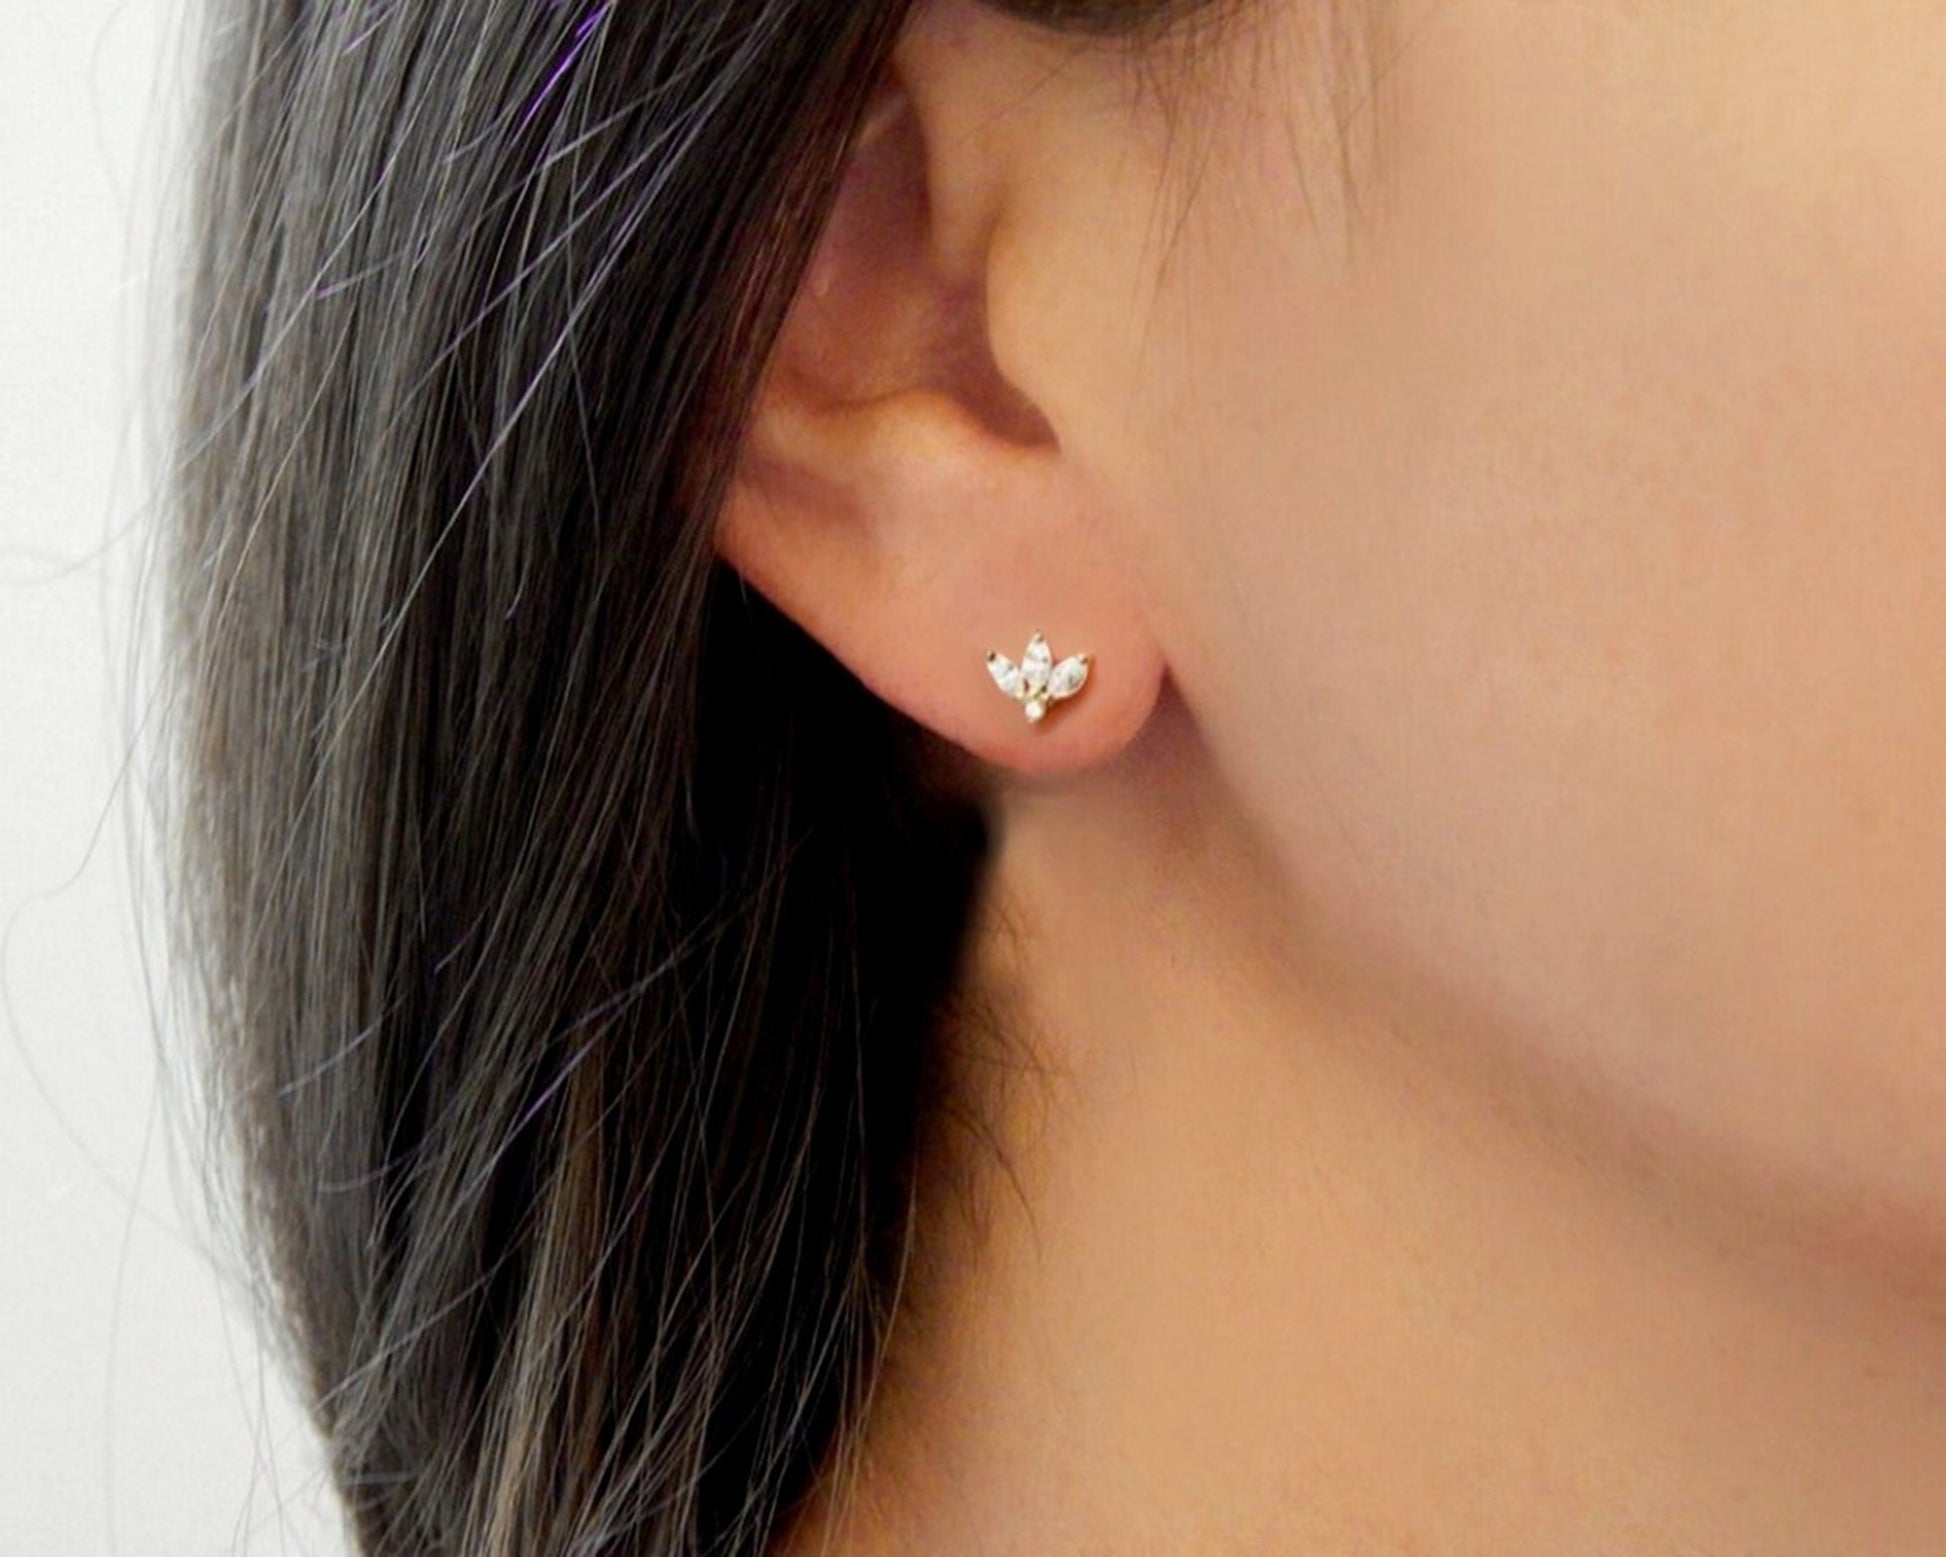 Woman's ear and profile wearing a simple diamond cz gold earring stud for sensitive skin.